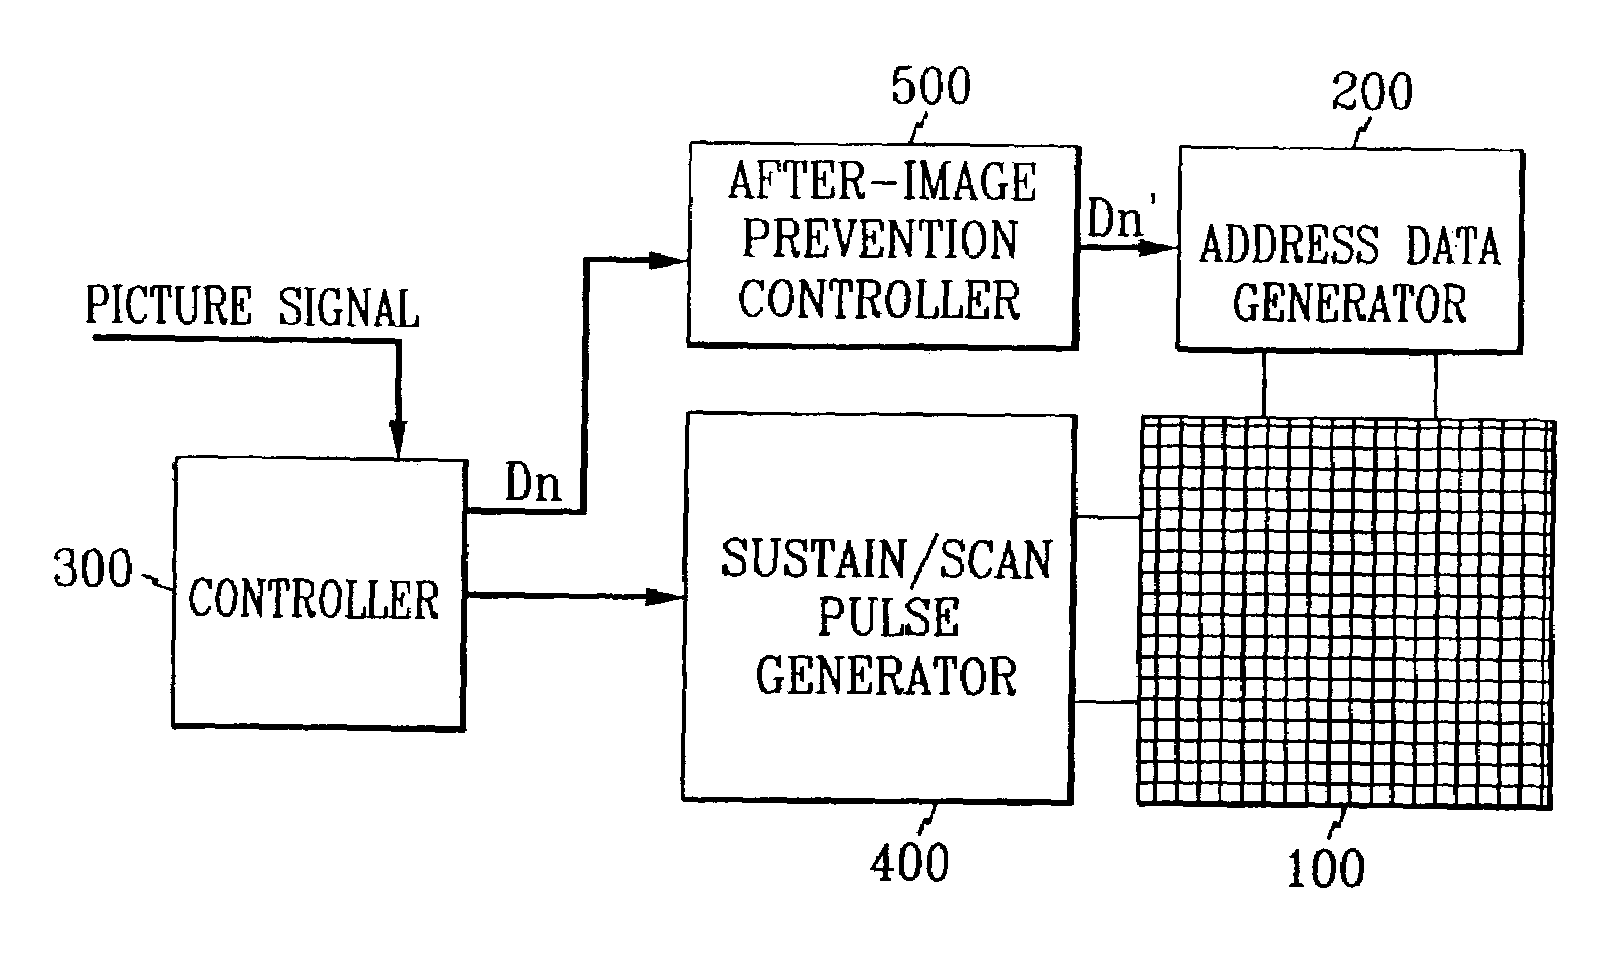 Plasma display panel method and apparatus for preventing after-image on the plasma display panel